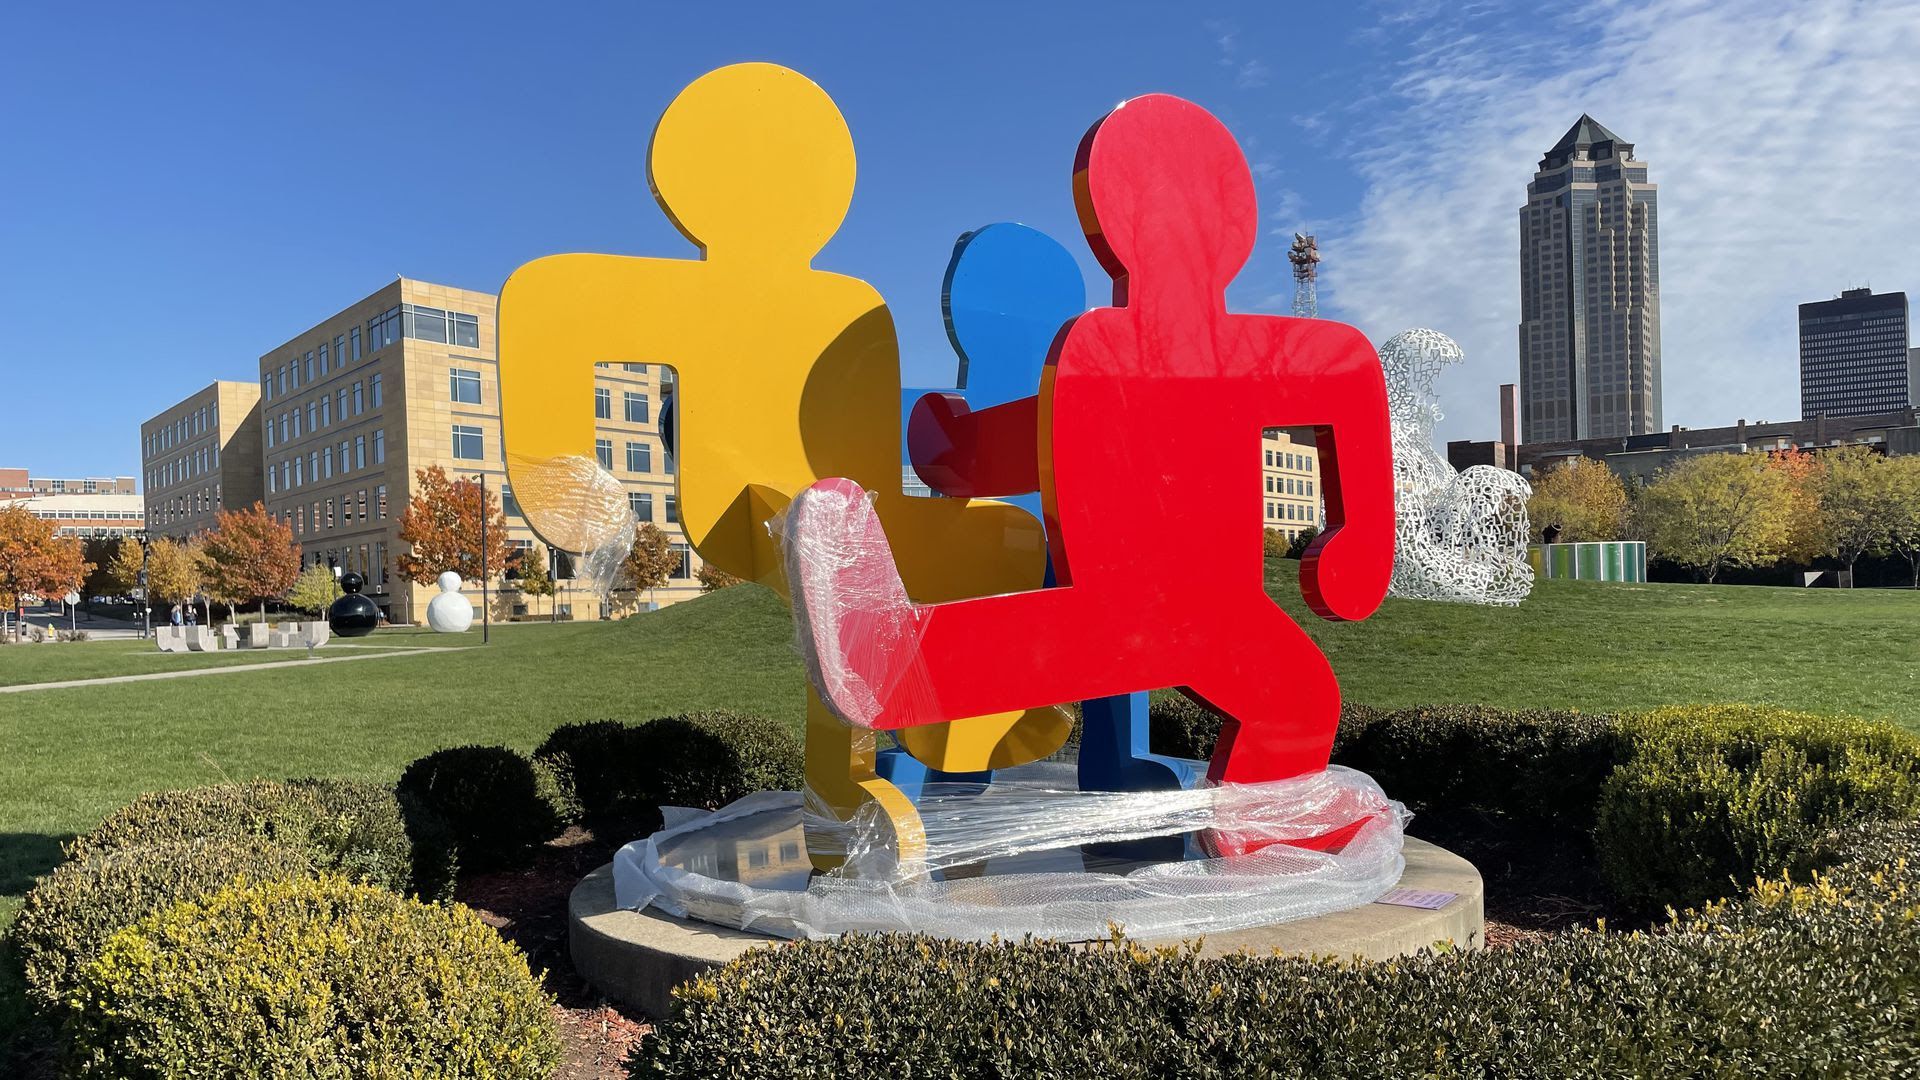 Three figure sculptures of yellow, blue and red as part of "Untitled (Three Dancing Figures, Version C)" at the Pappajohn Sculpture Park.